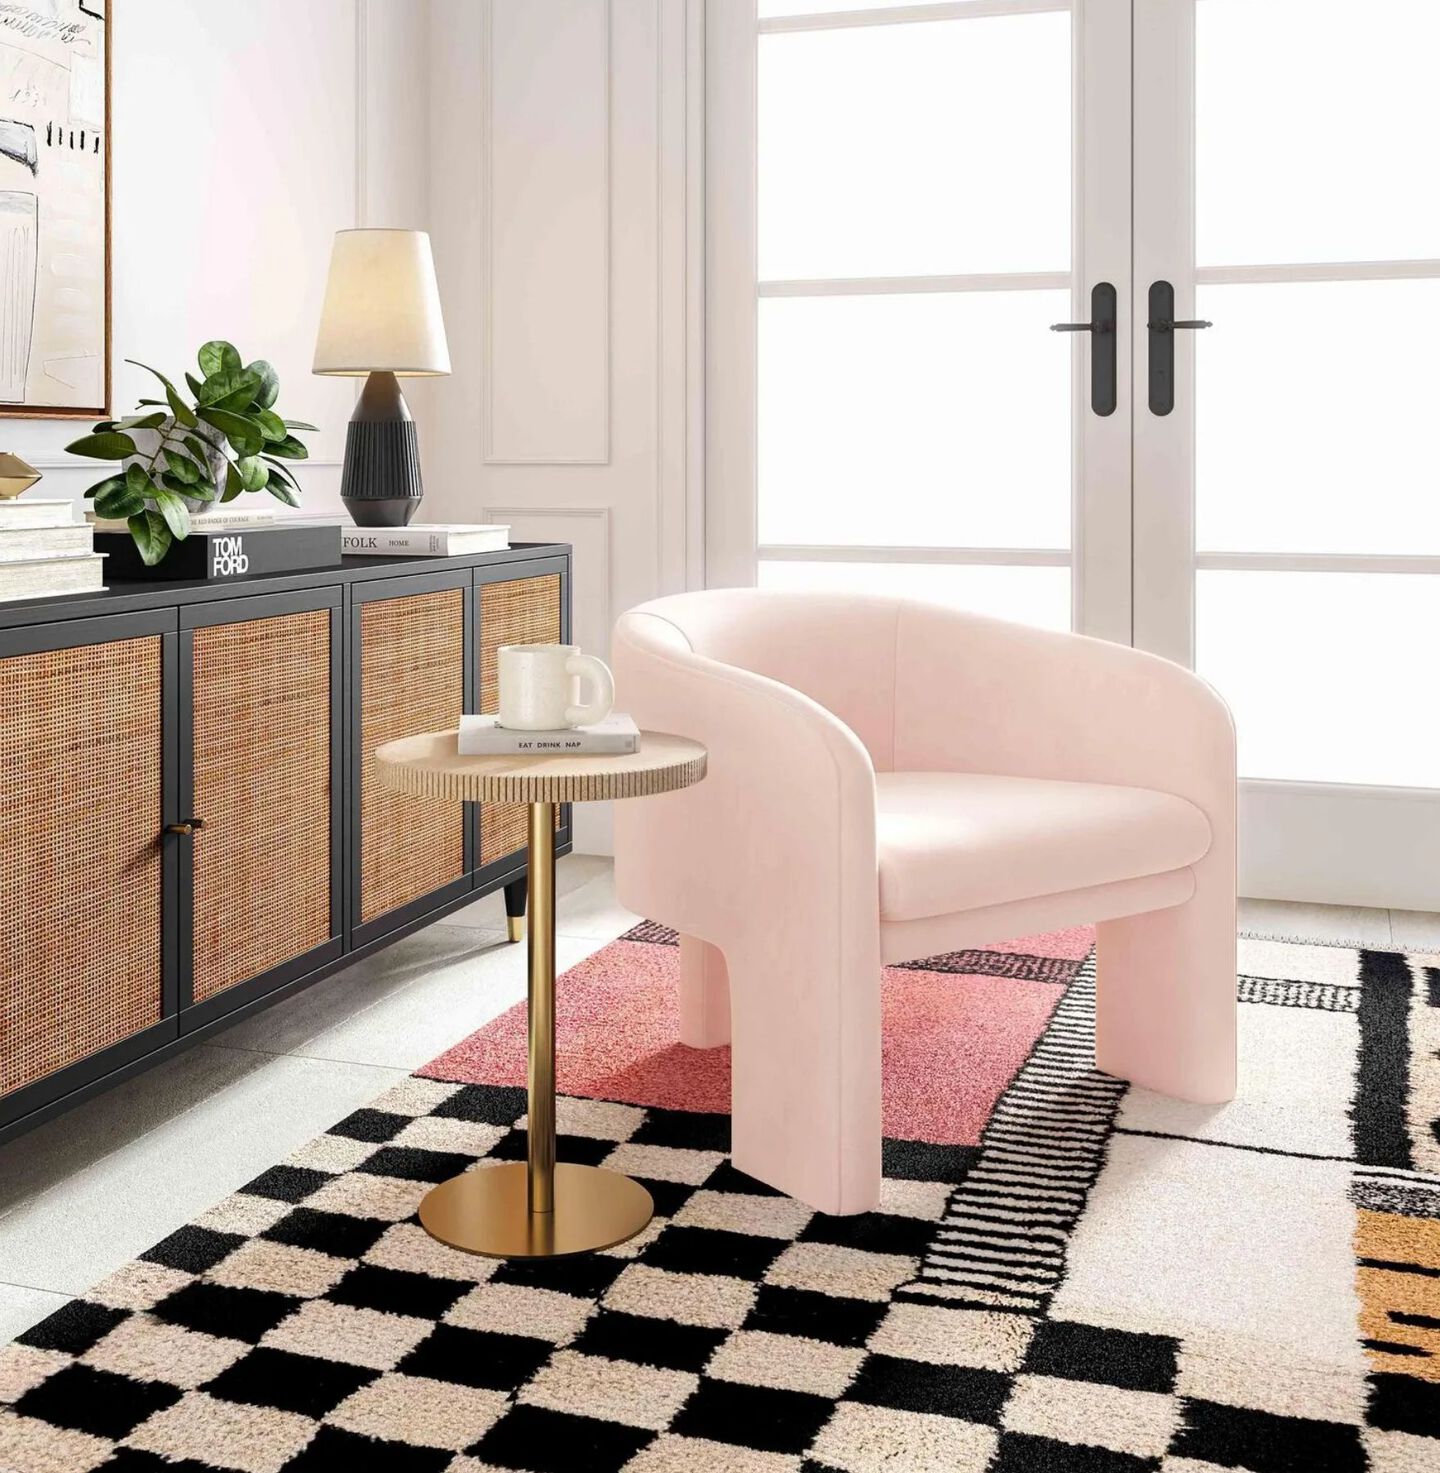 Light pink chair sitting on top of a black and white checkered rug